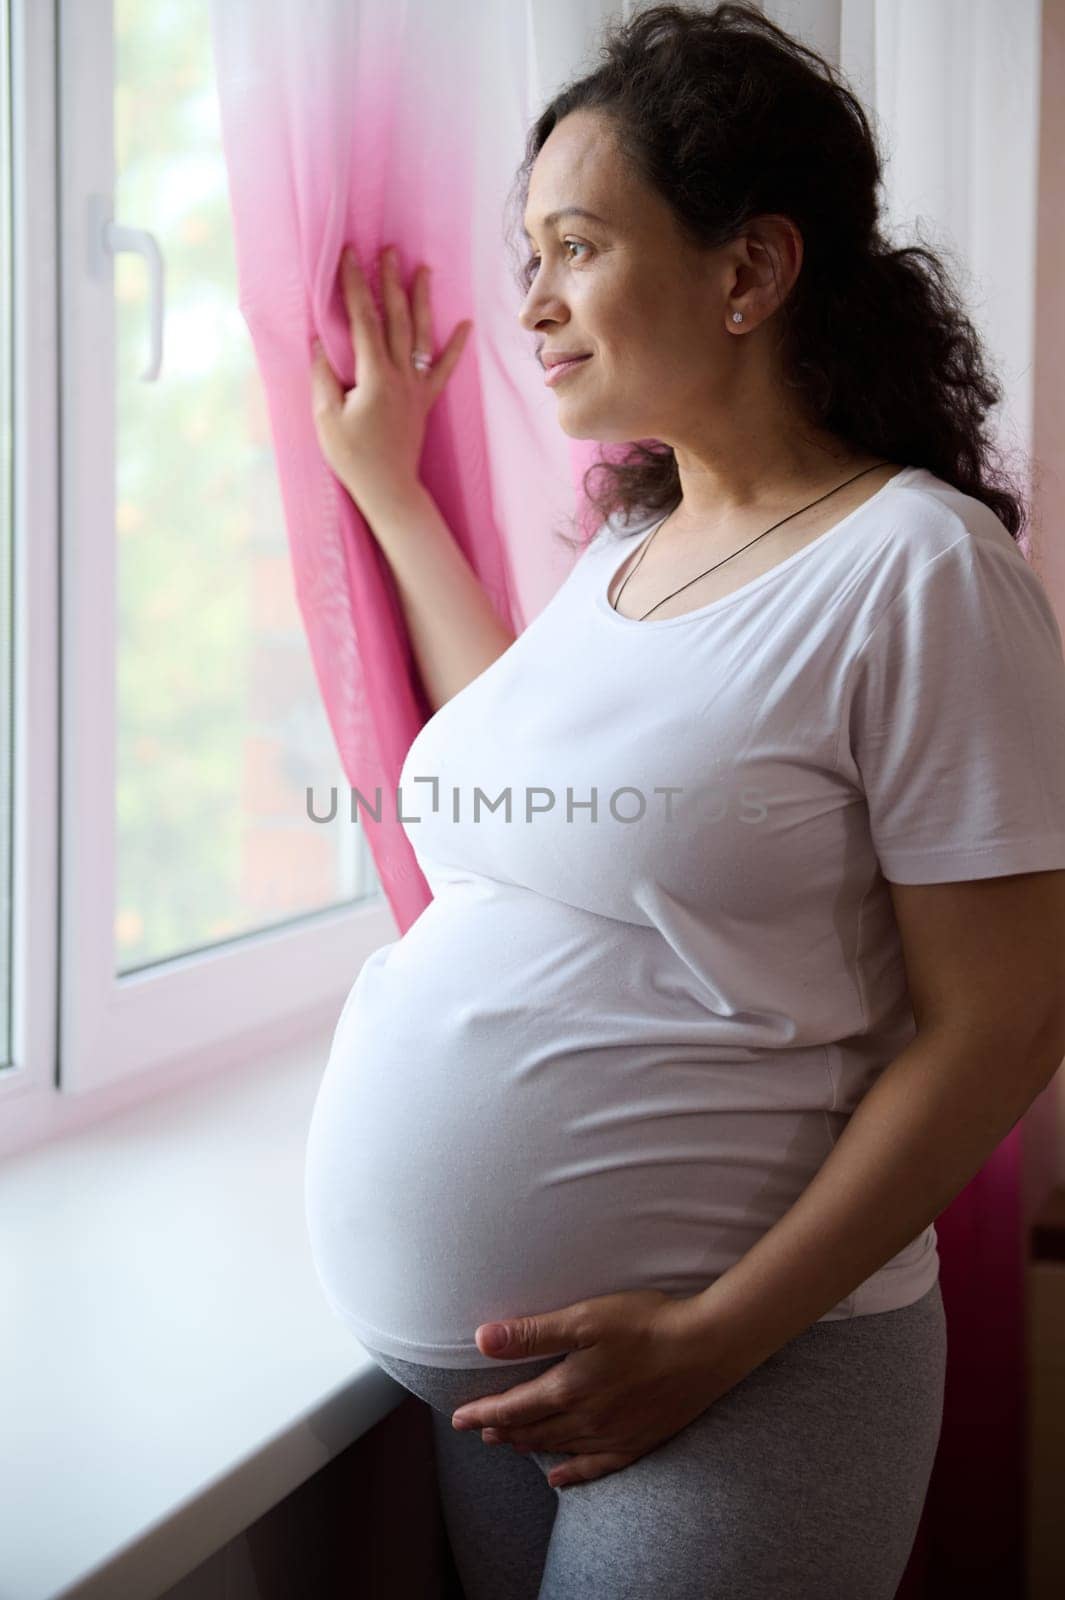 Beautiful ethnic pregnant woman, expectant mother dreamily looking out the window, touching her belly in late pregnancy by artgf